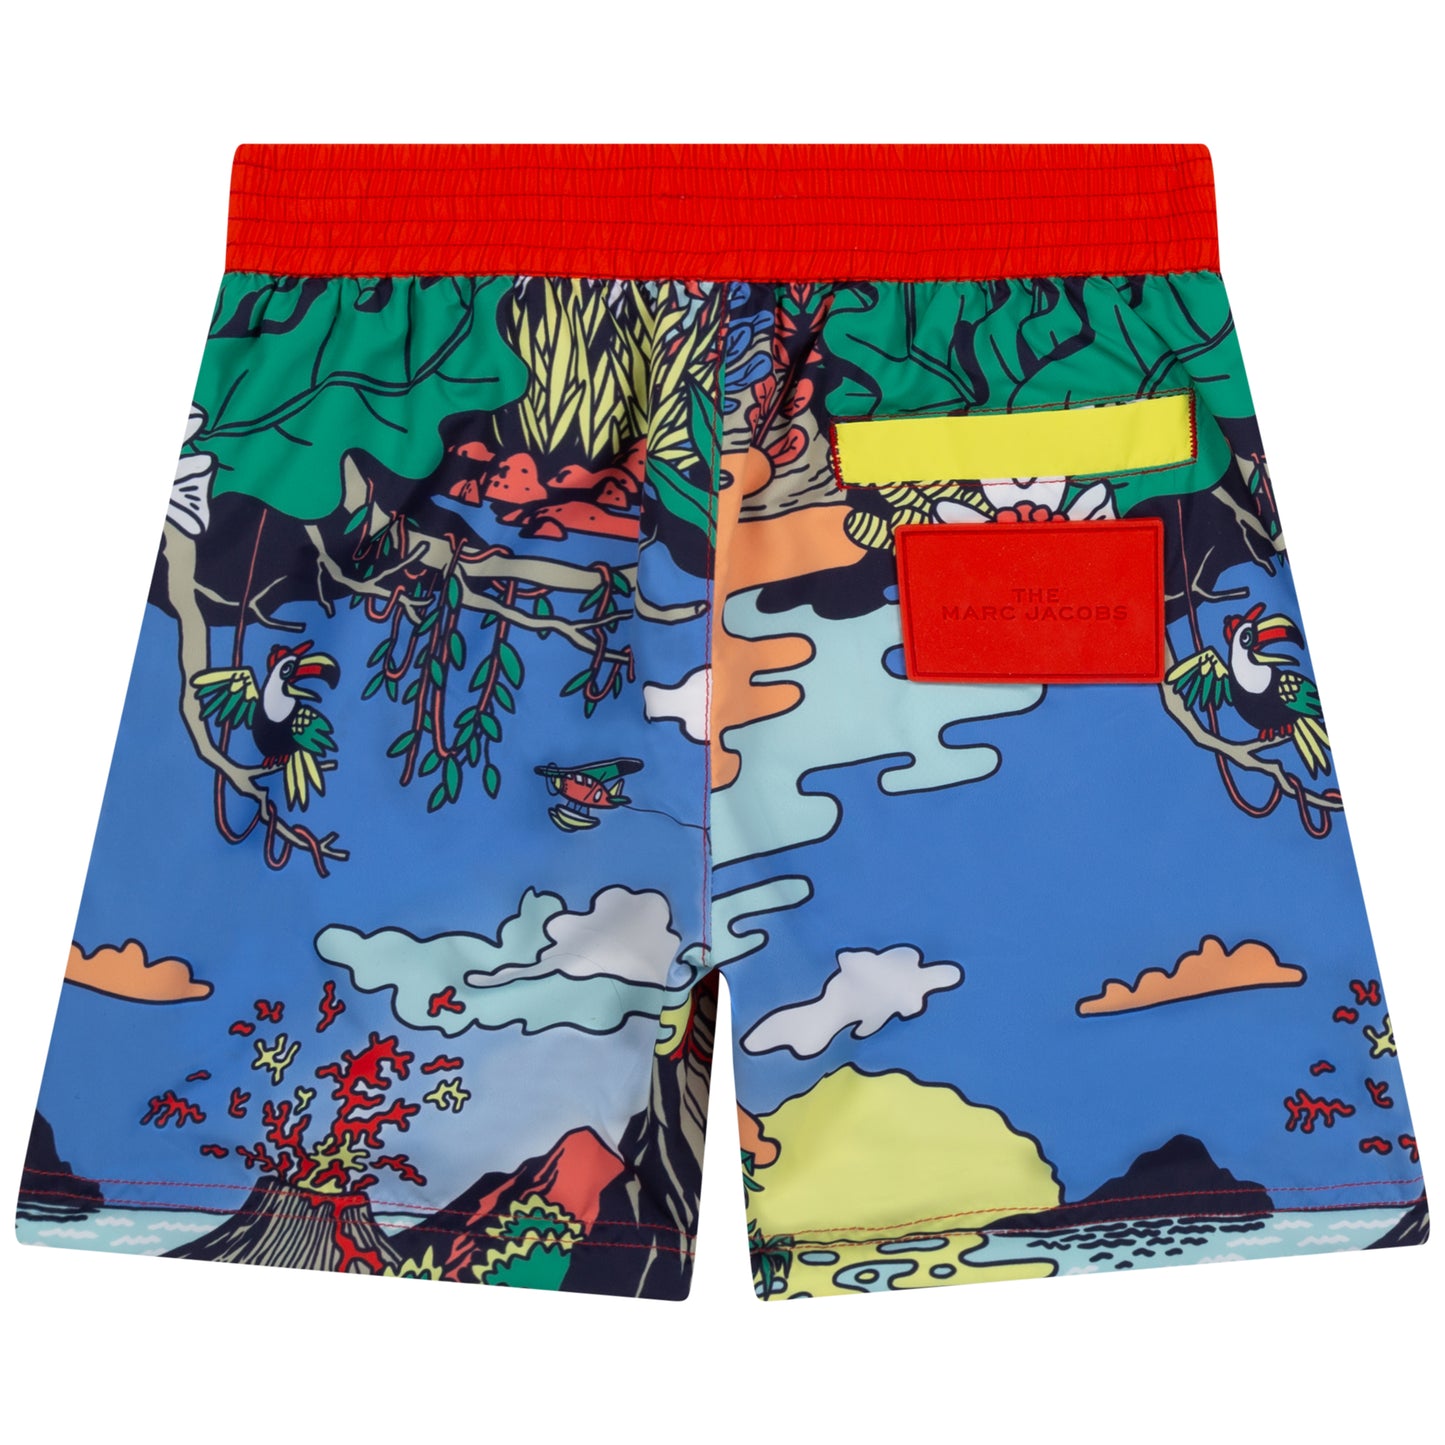 The Marc Jacobs Graphic Swimming Shorts